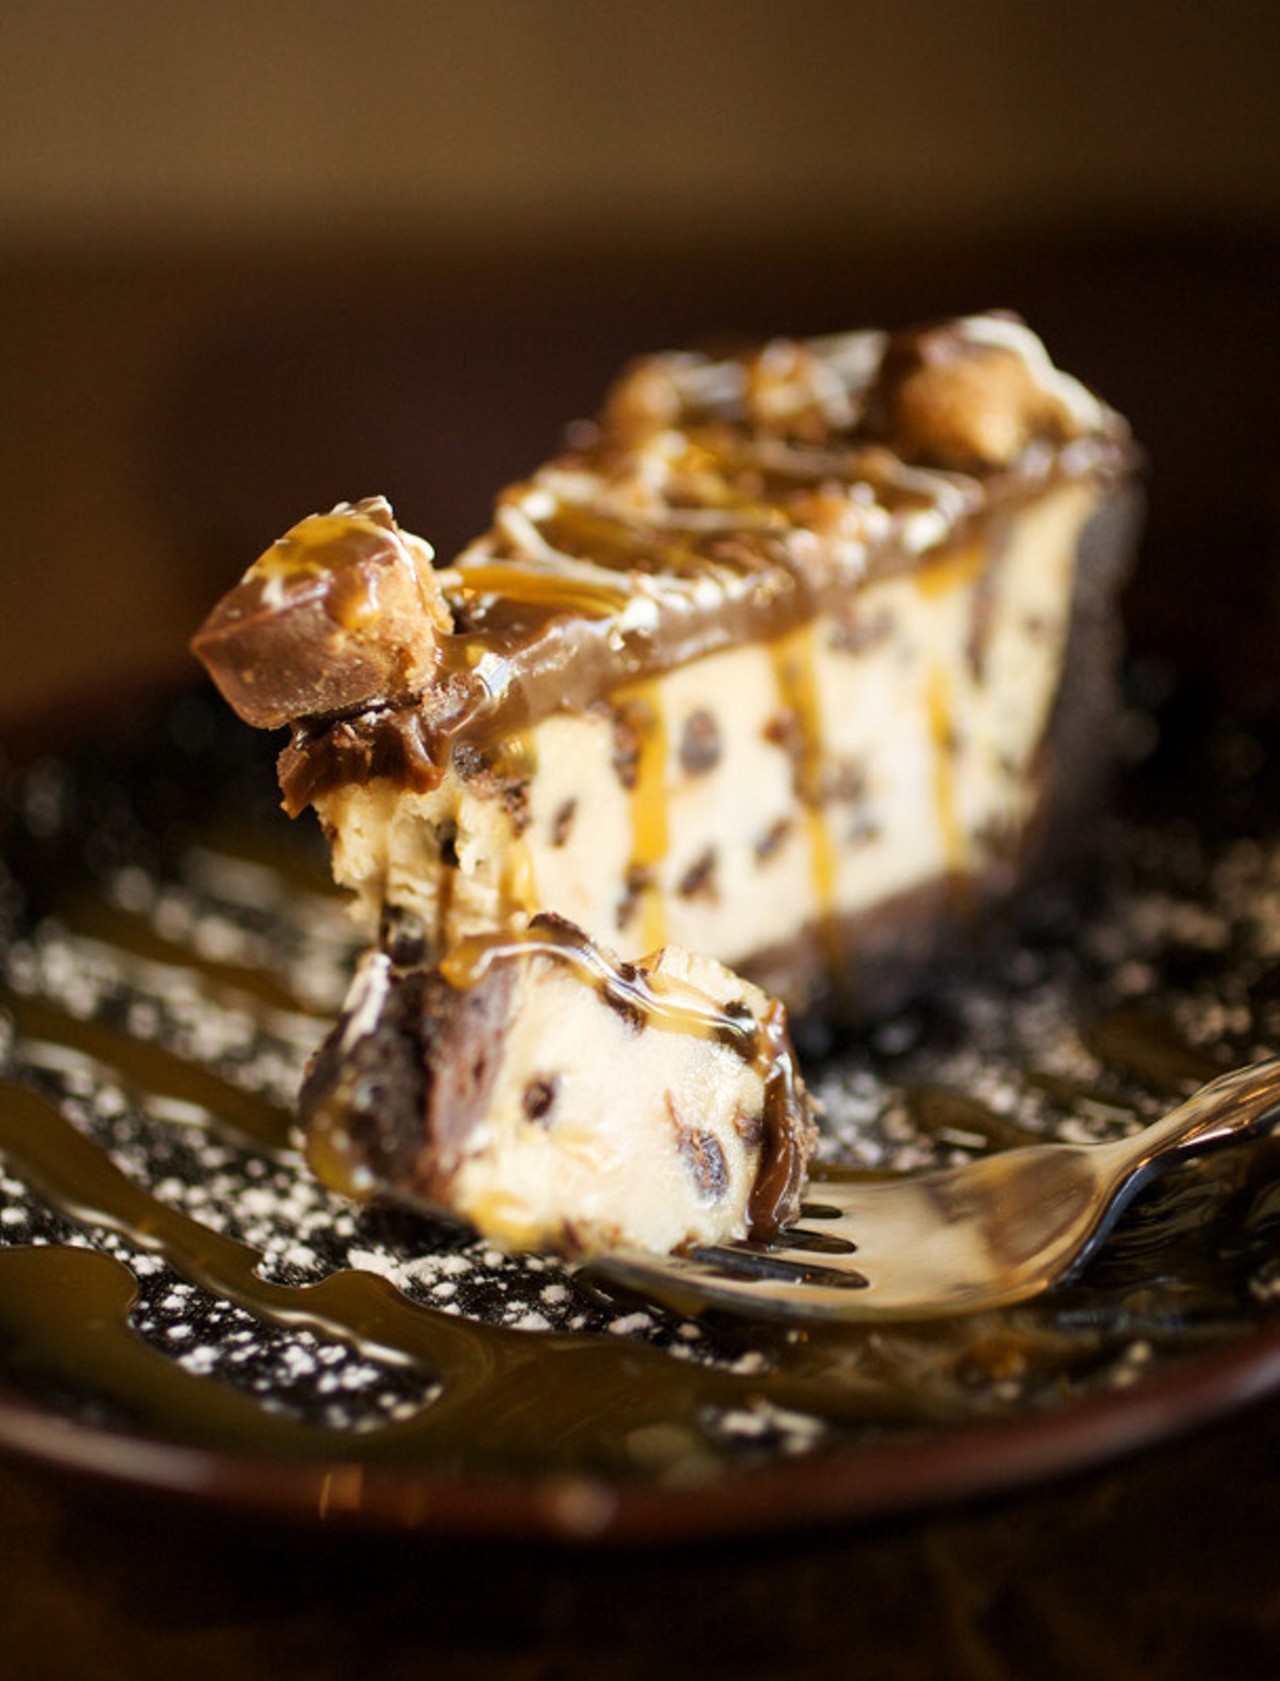 The Peanut Butter Cup Pie.